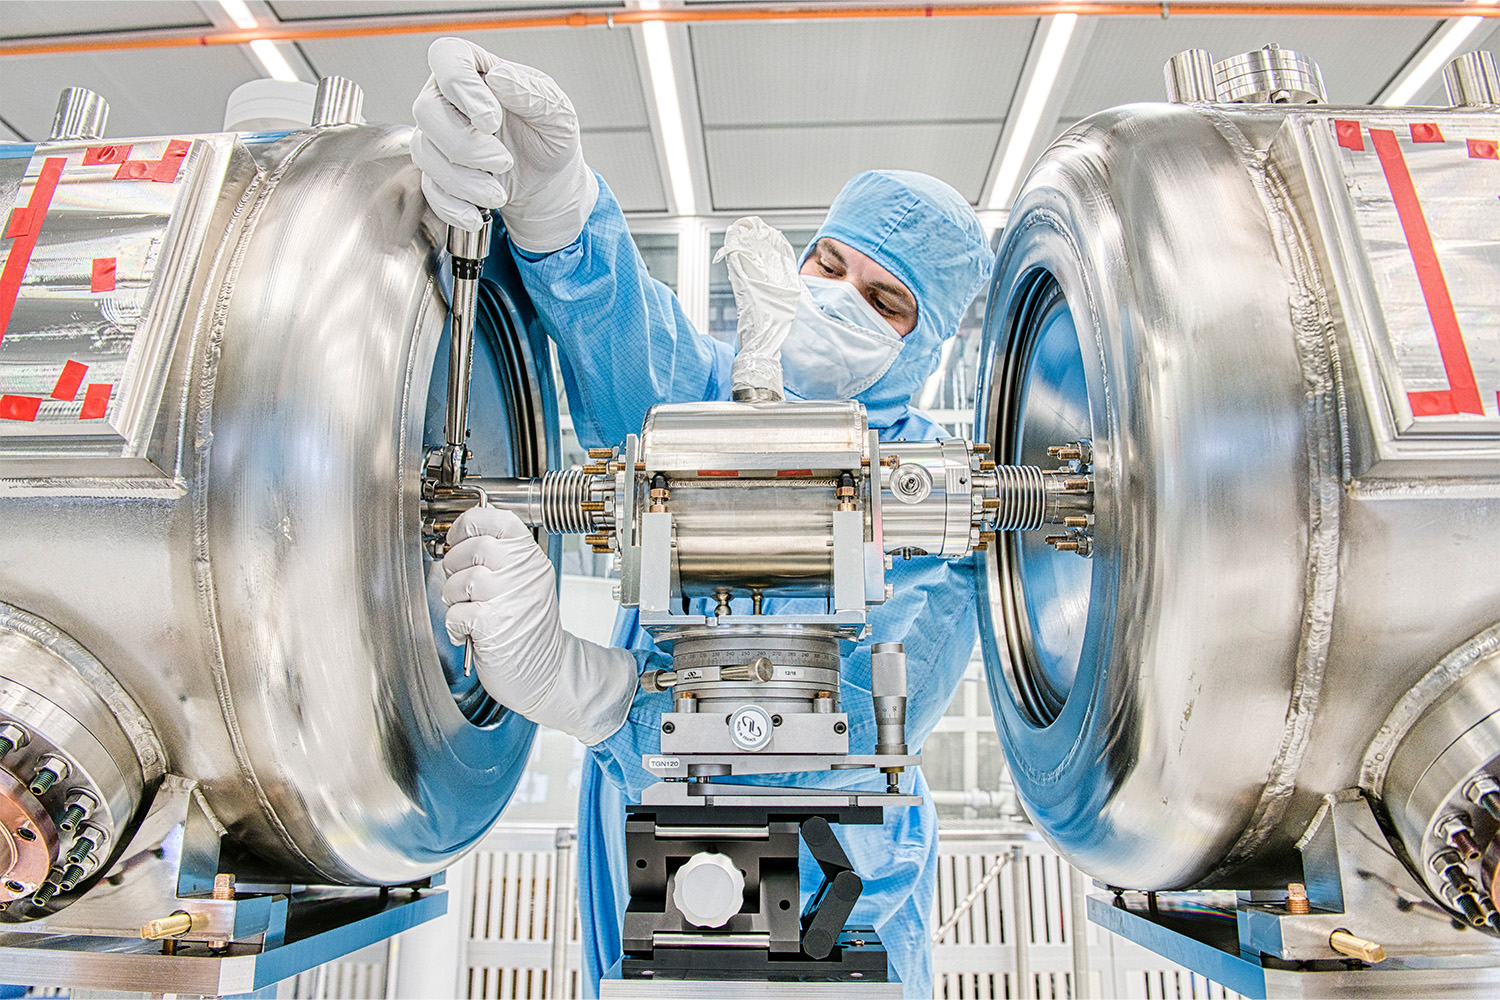 A technician in a clean room works on a spoke resonator of the PIP-II, an in-progress linear particle accelerator at Fermilab.